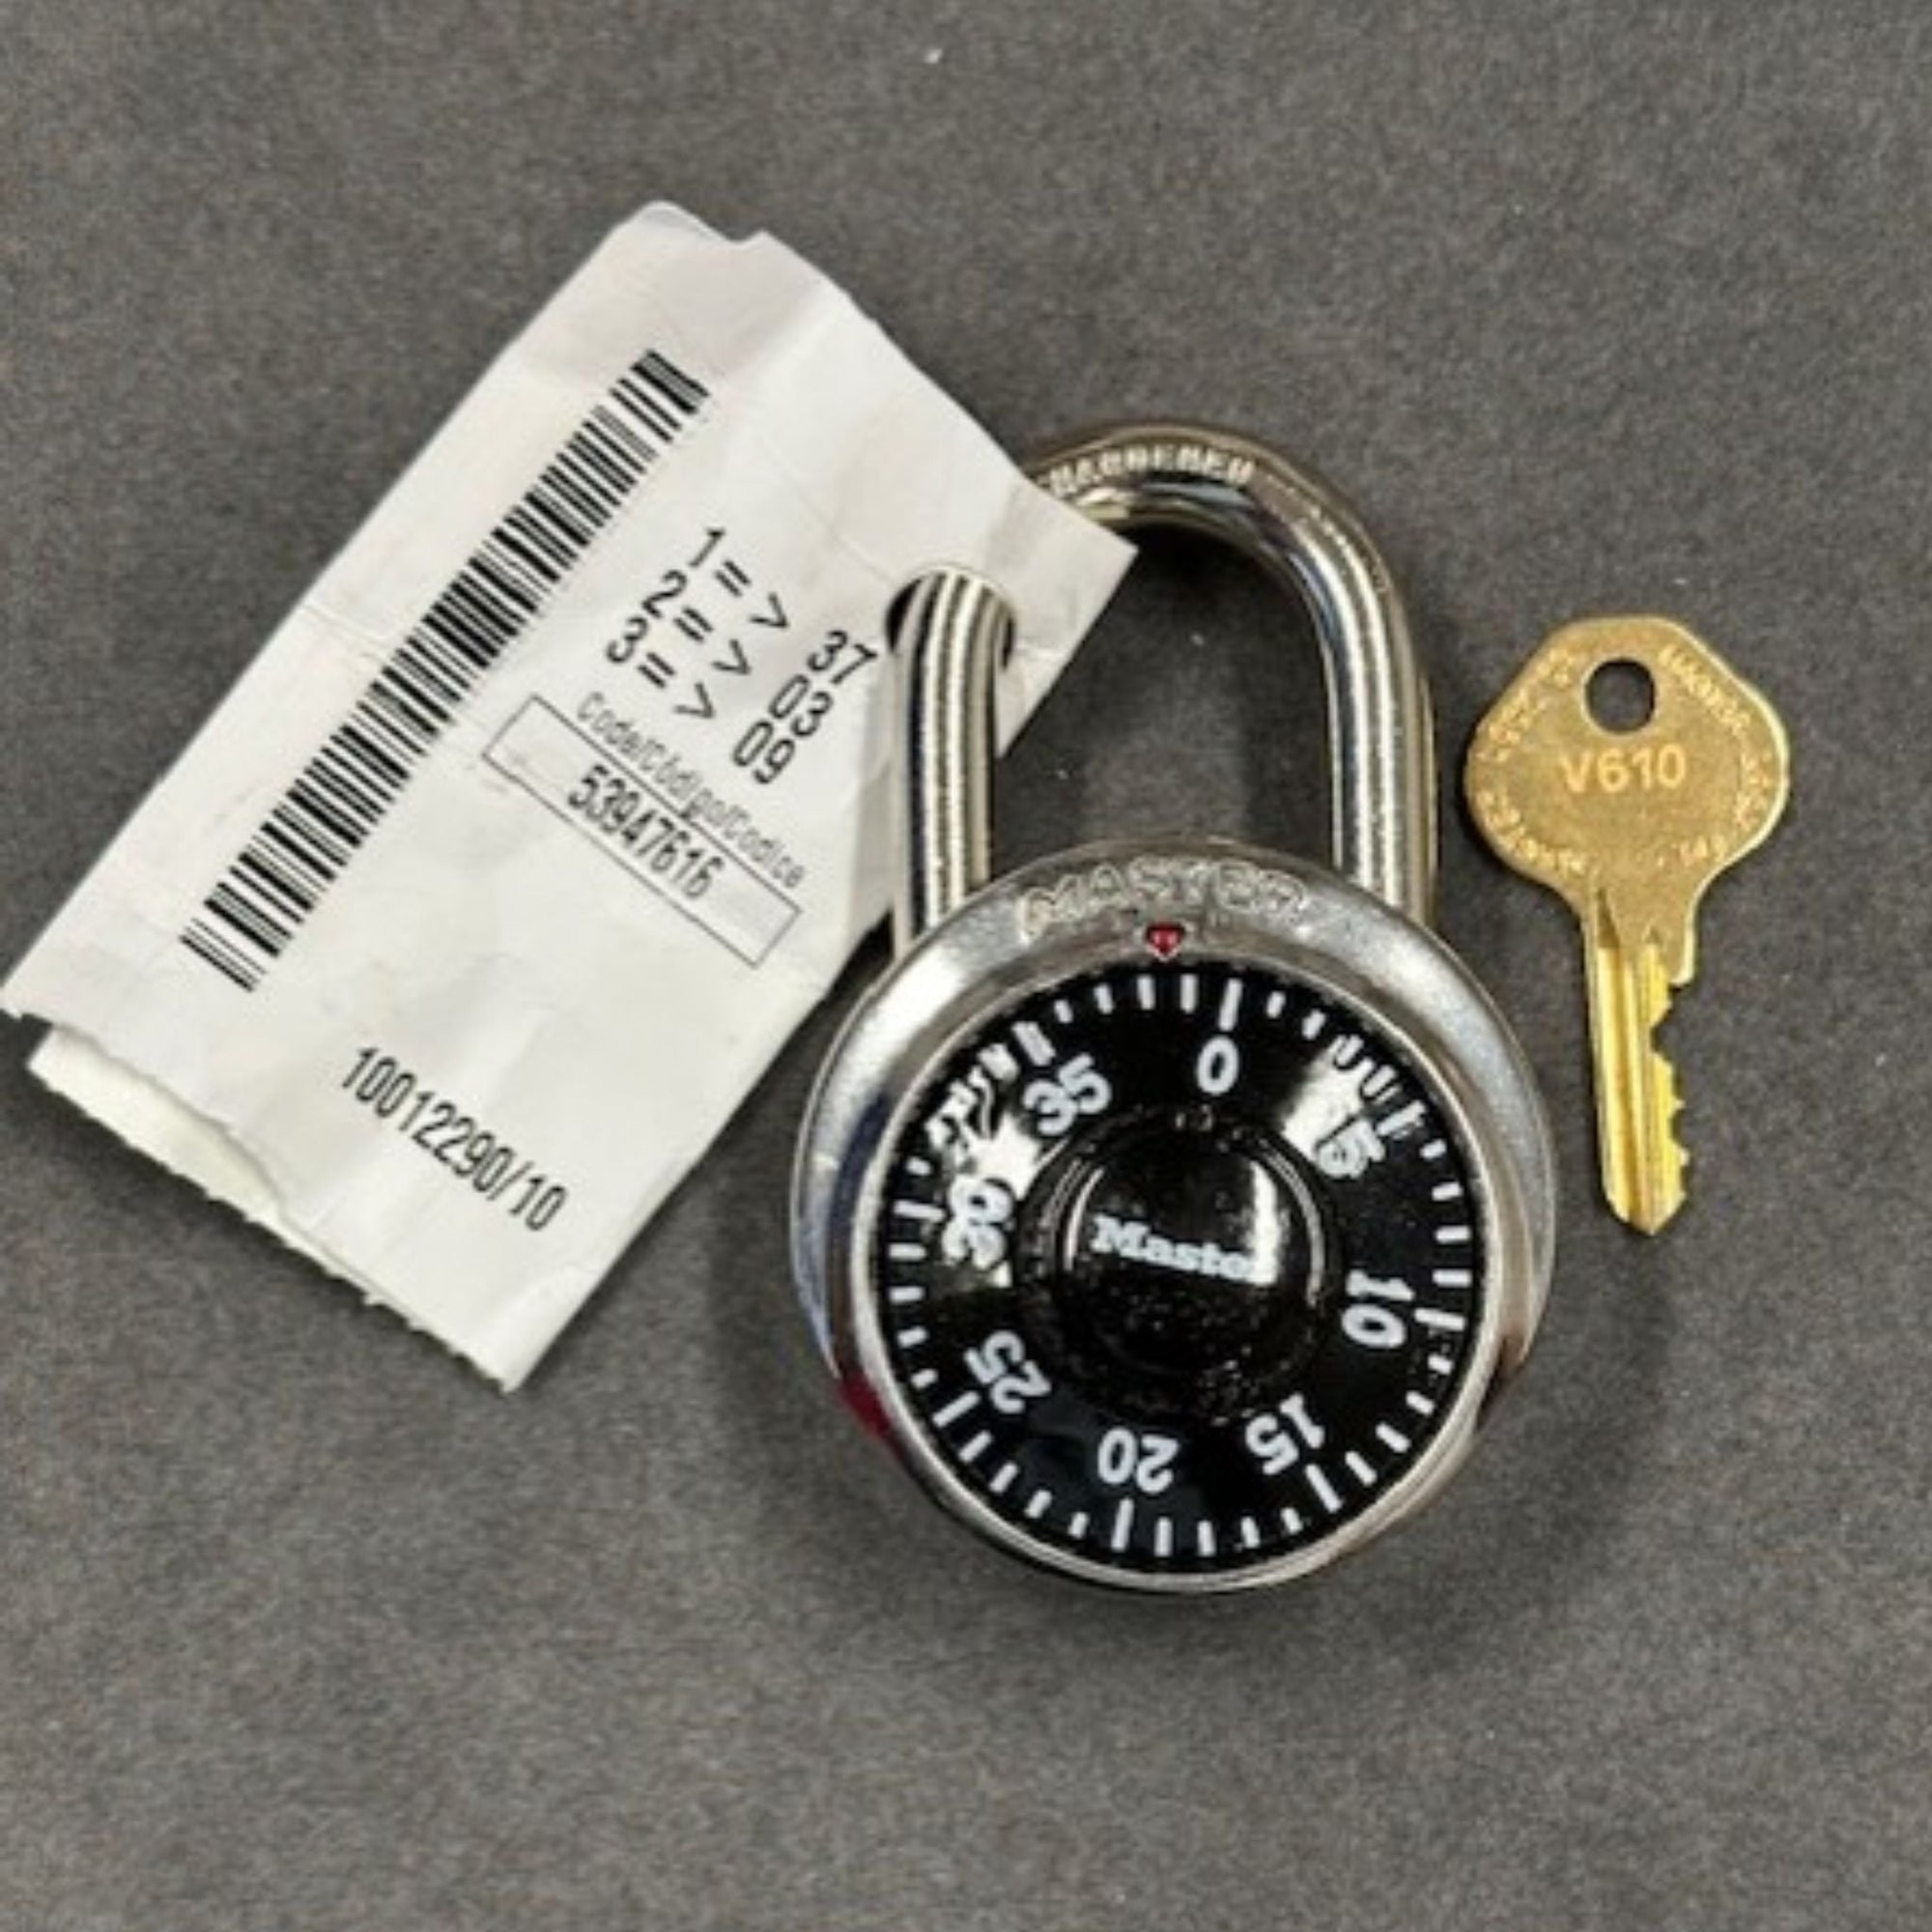 The "Keyed Combo" From The Lock Source Includes 1 Master Lock 1525-V607 Locker Lock, The Combination And Also Matching V607 Control Key - The Lock Source